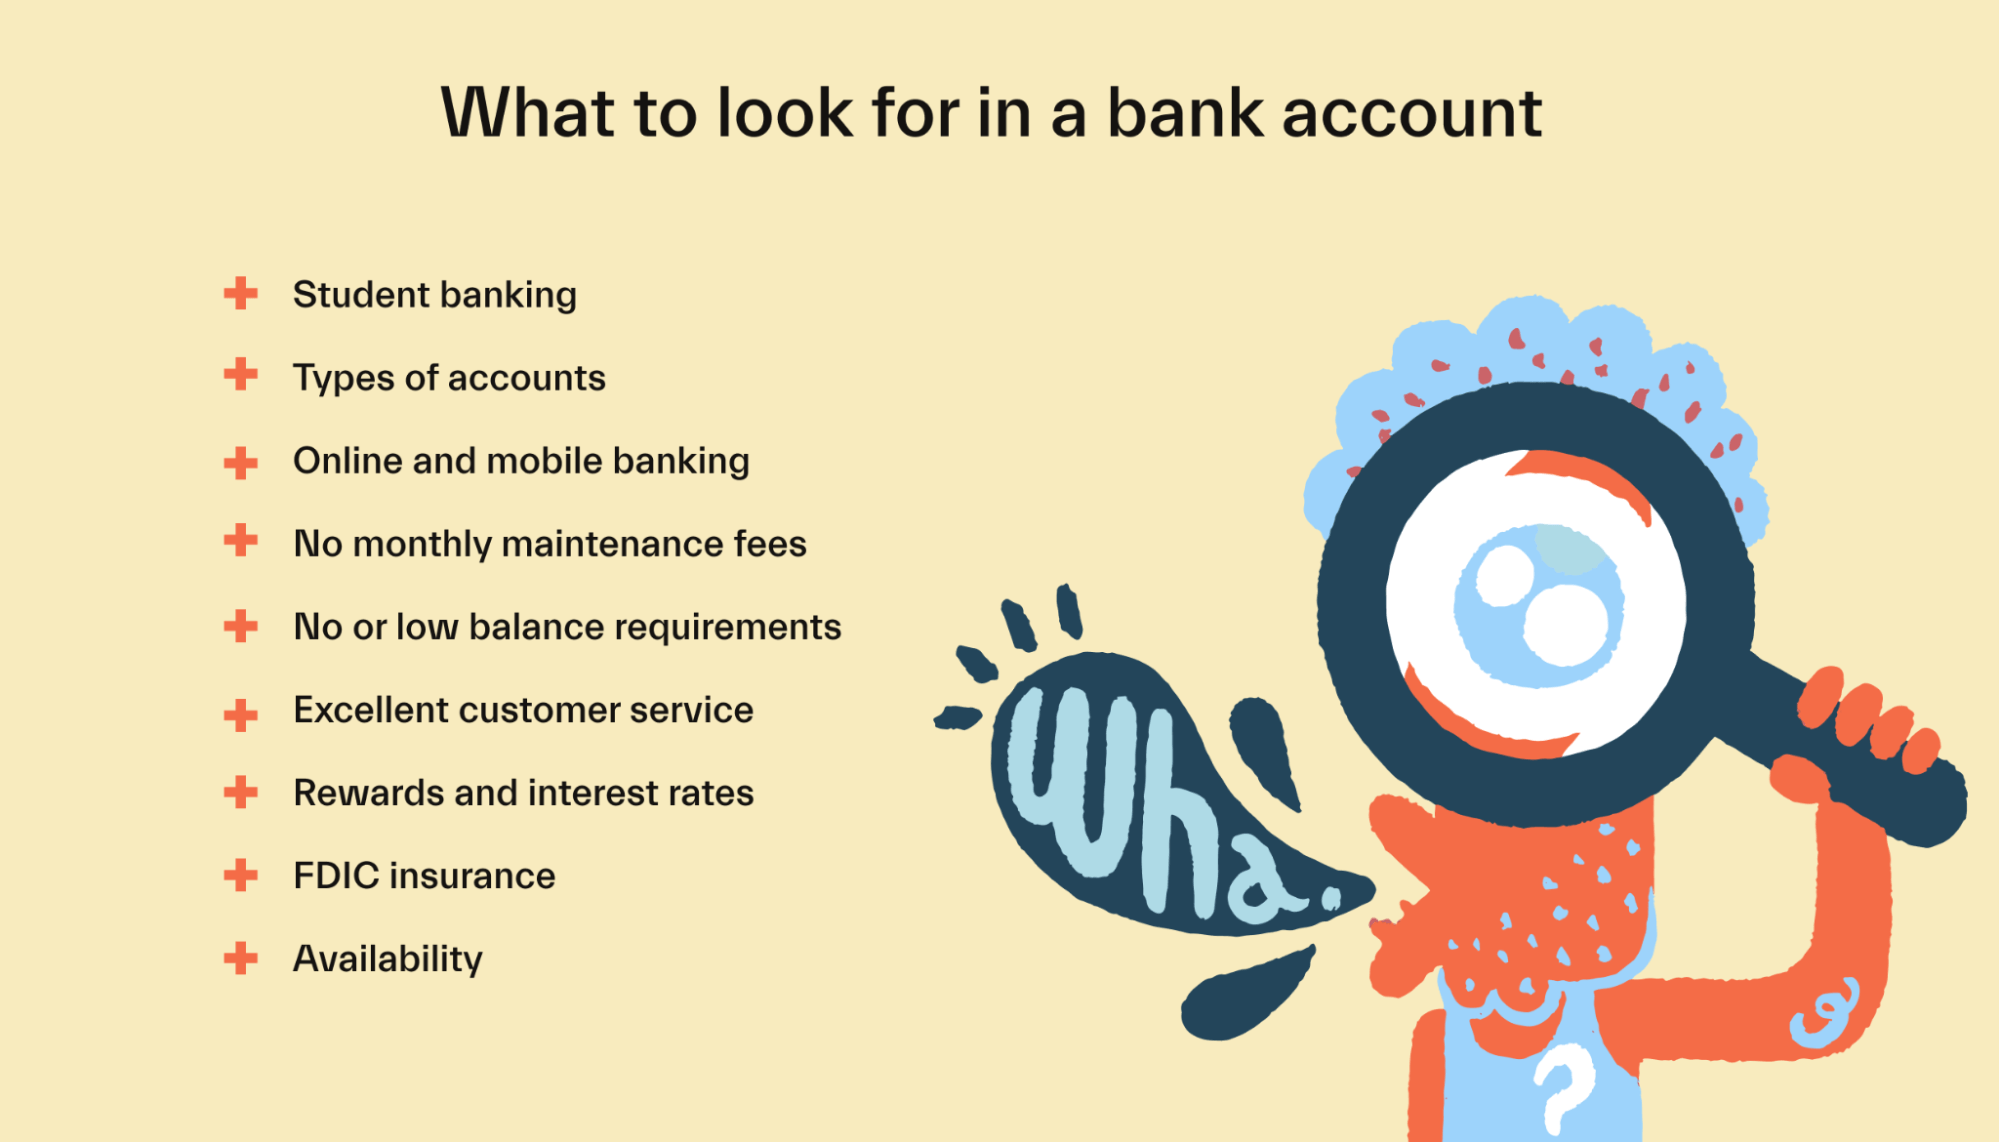 What to look for in a bank account